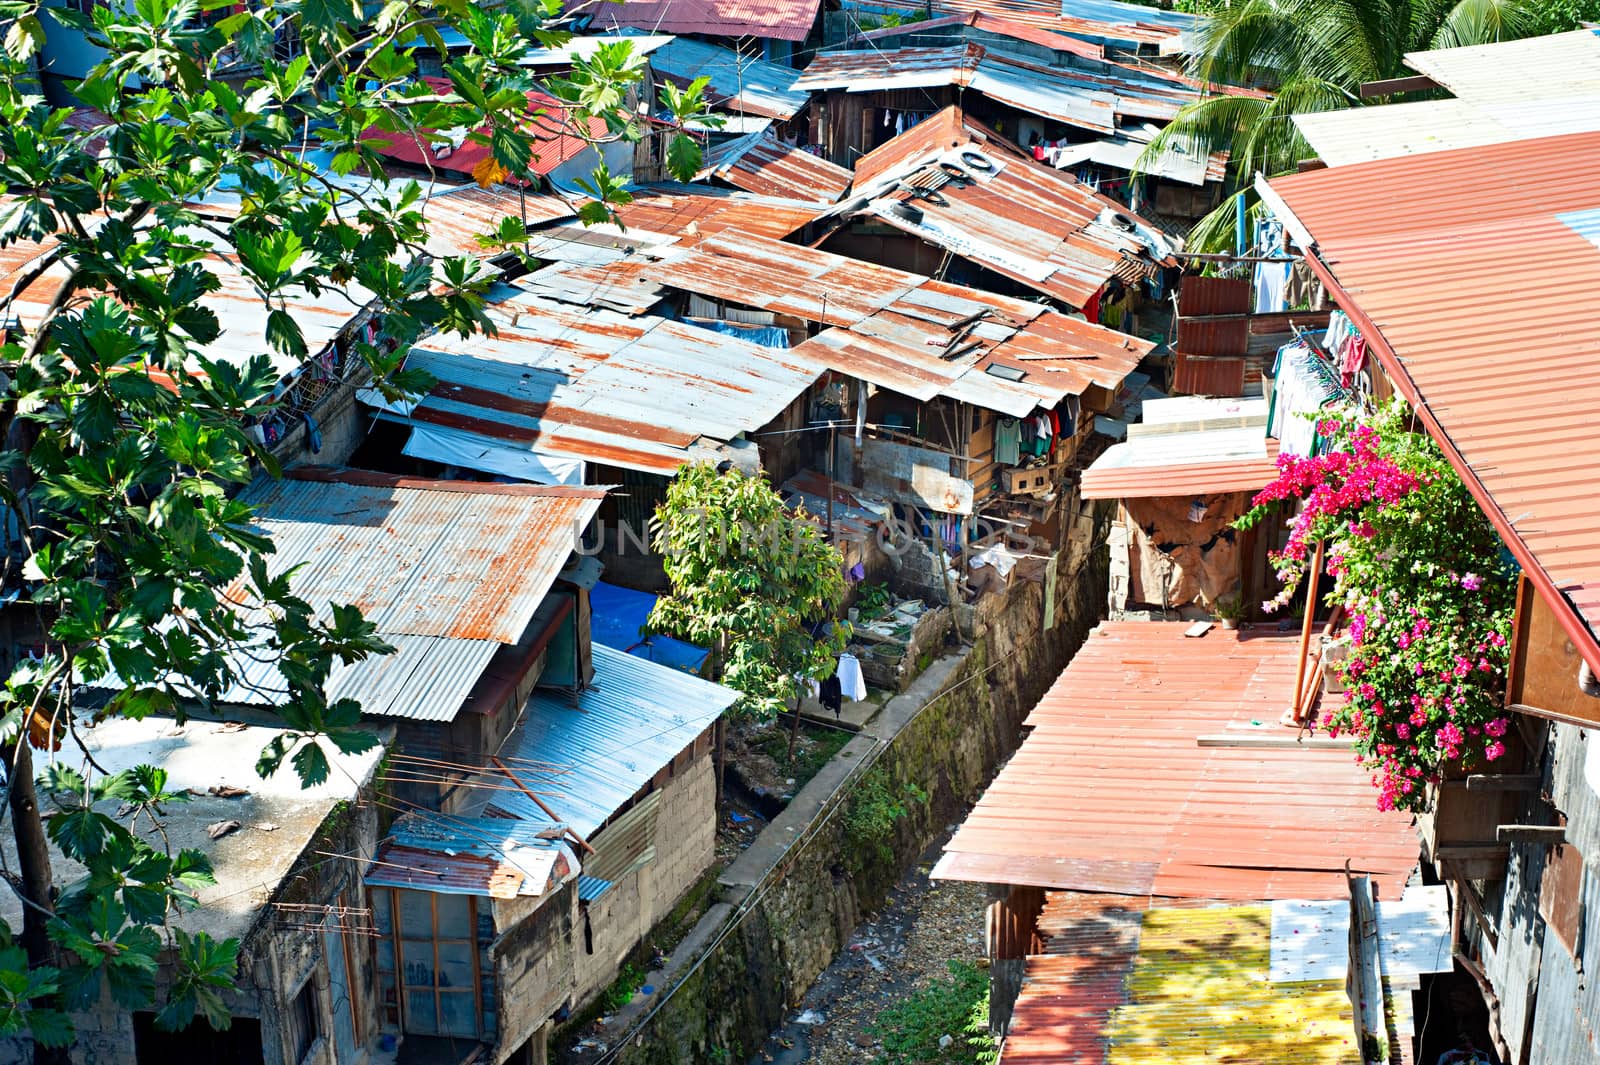 Aerial view on slums at night in Cebu city, Philippines